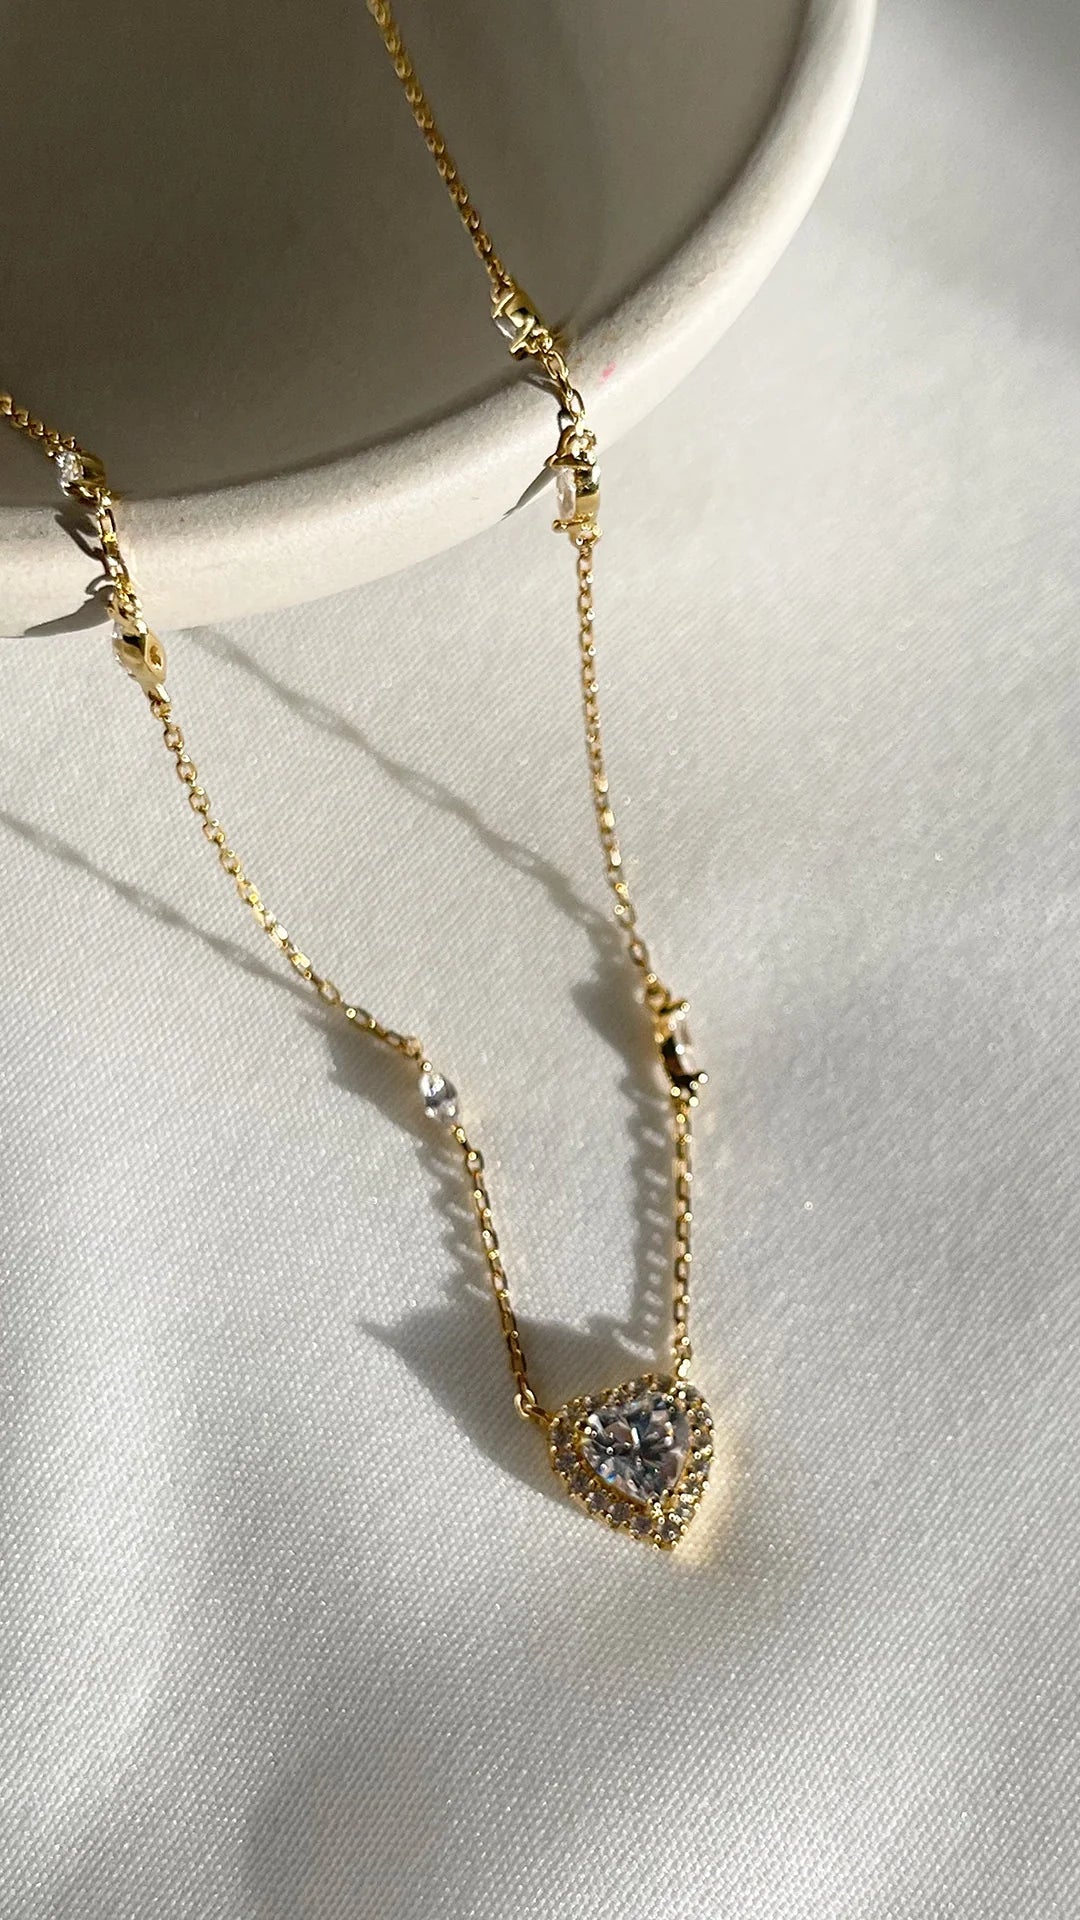 Heart Cut Zircon Stone Necklace Gold Plating